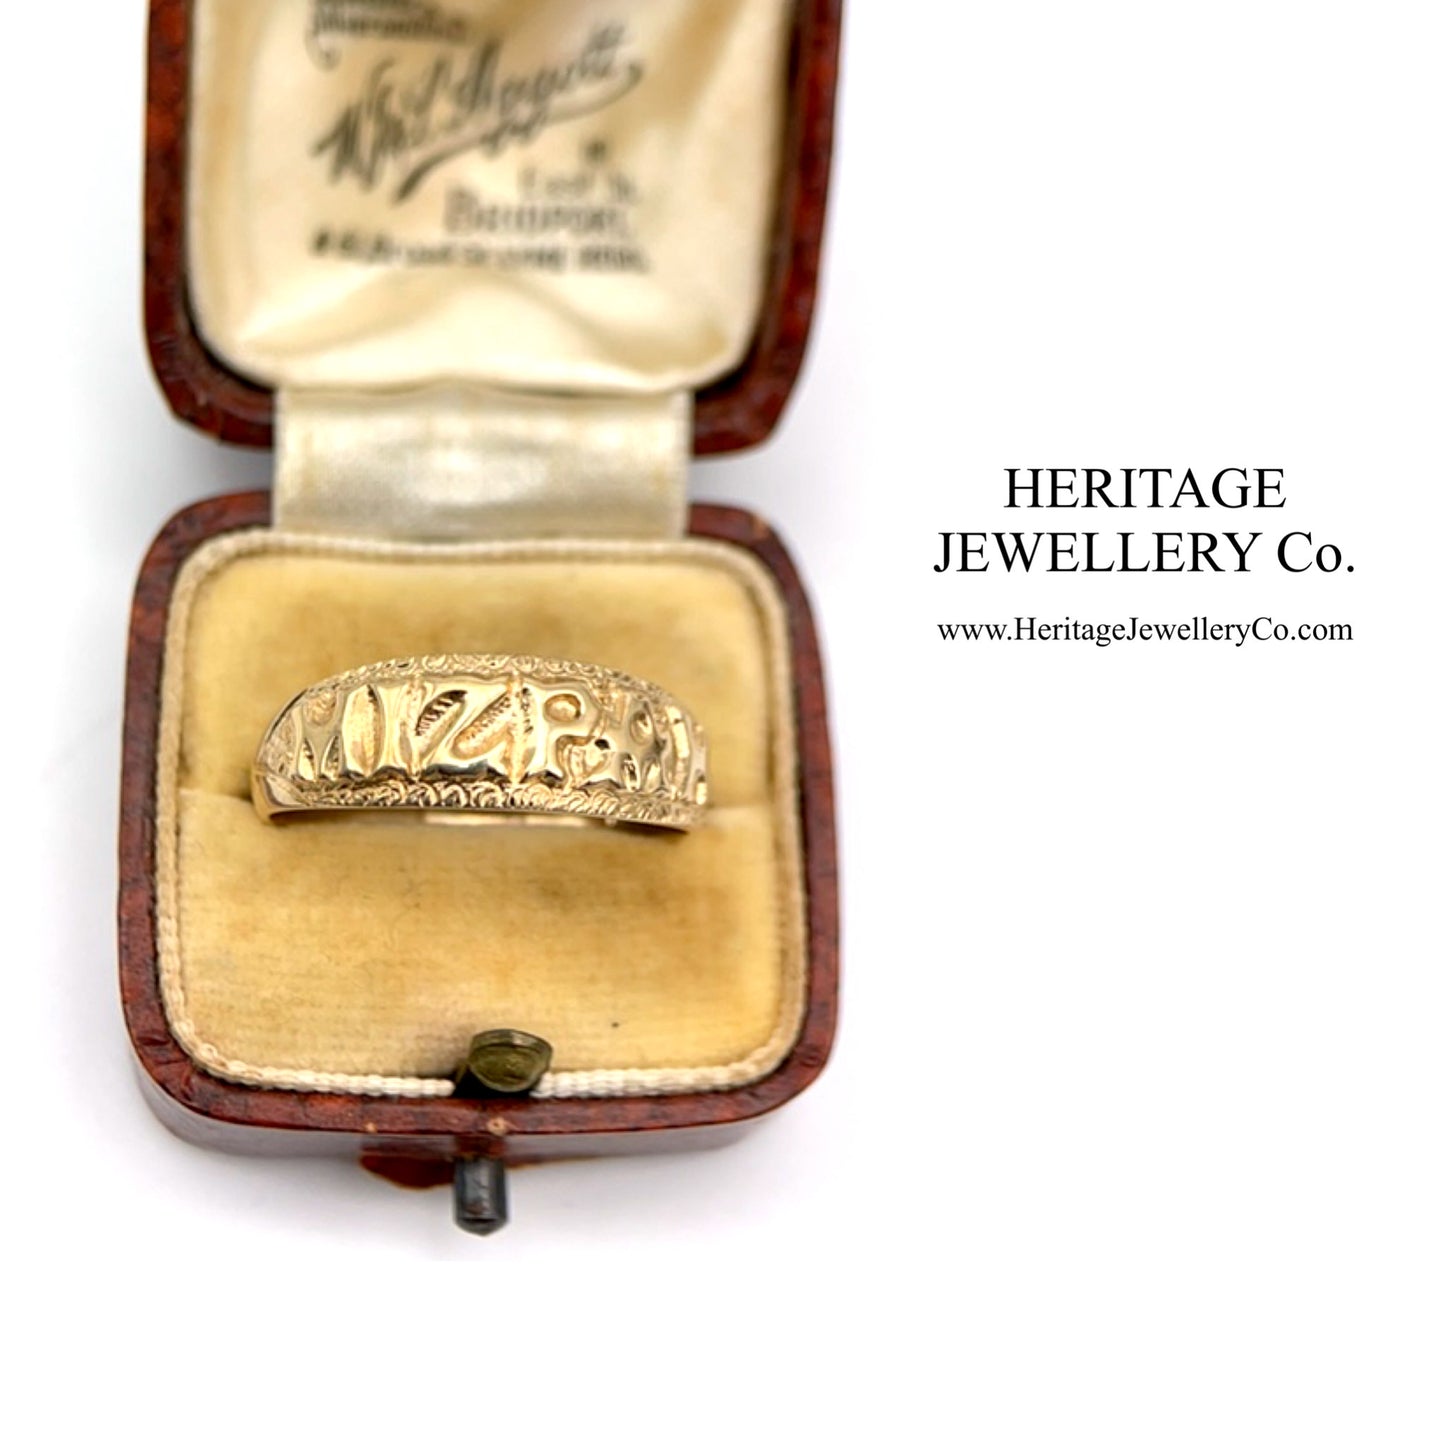 Vintage Gold Mizpah Ring with Gothic Lettering